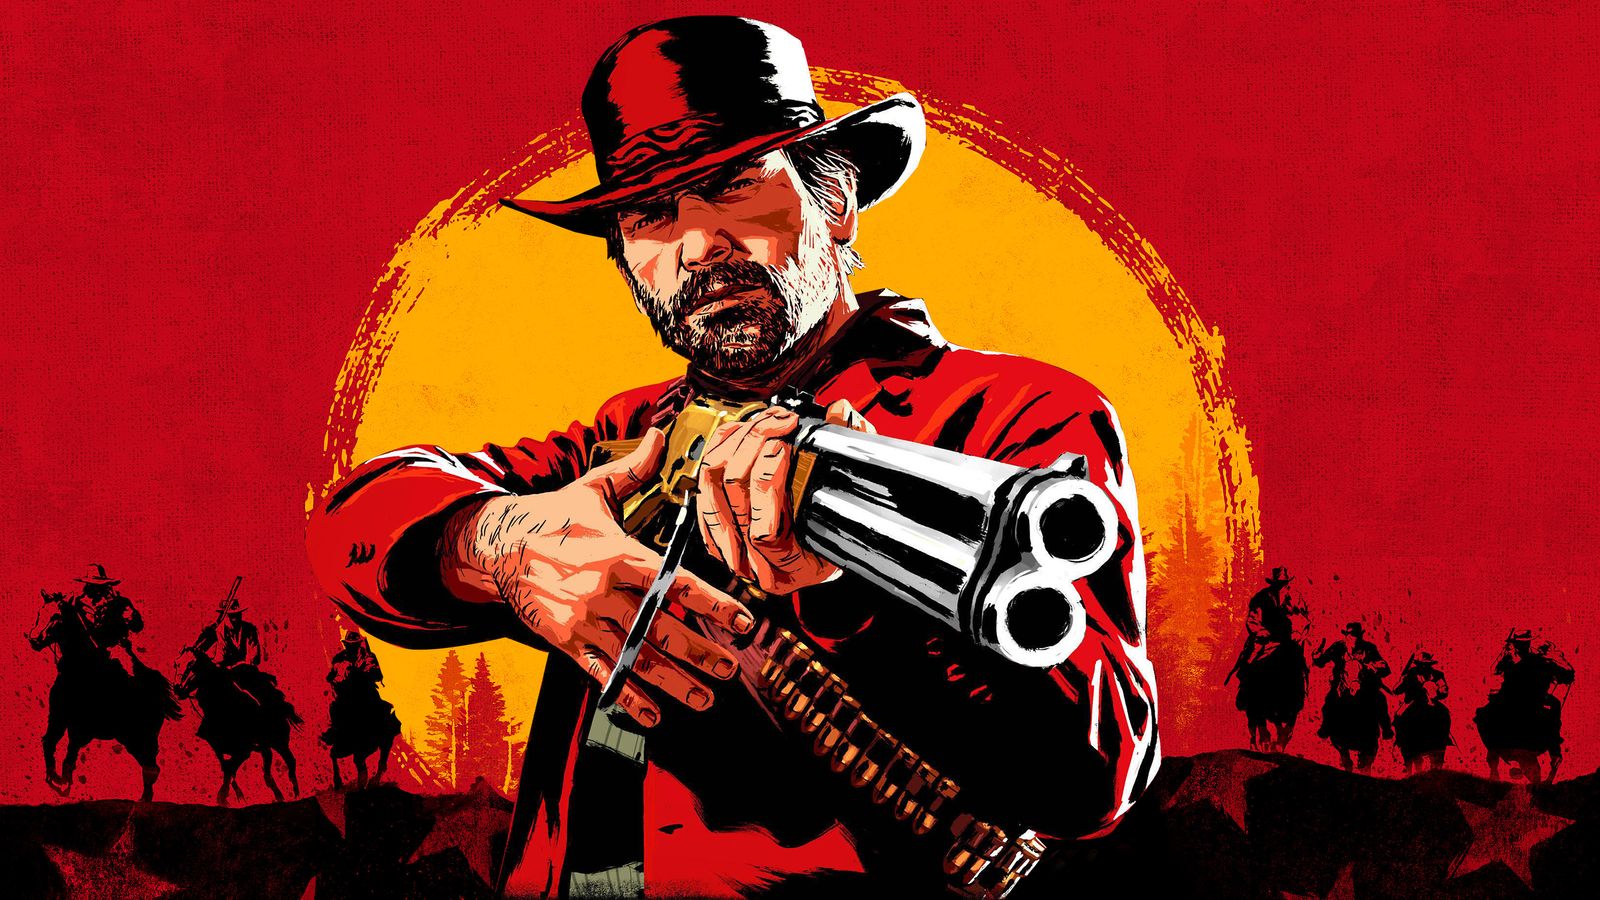 Red Dead Redemption 2, Red Dead Redemption, Rockstar Games, PlayStation, Nintendo, Switch, Sony, PC, Microsoft, Xbox